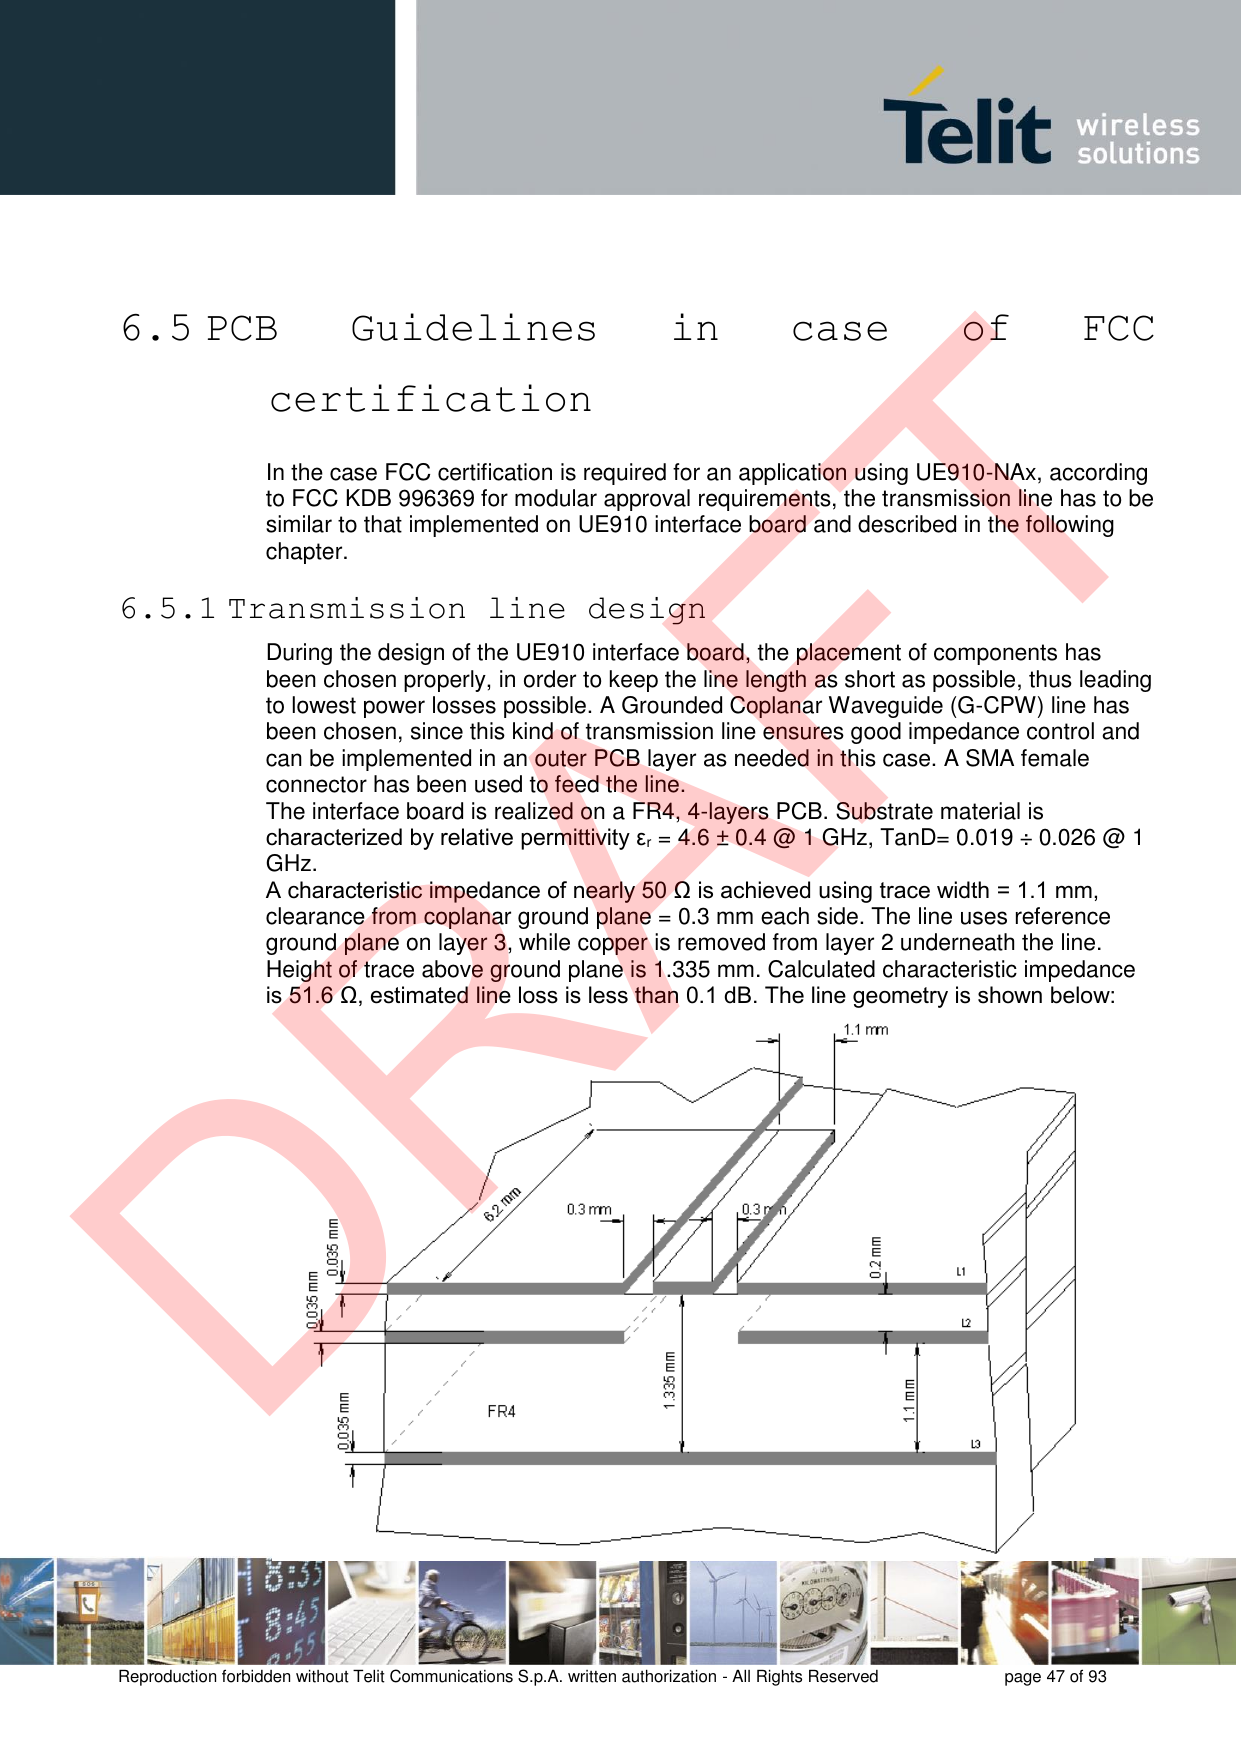 Reproduction forbidden without Telit Communications S.p.A. written authorization - All Rights Reserved  page 47 of 93 6.5 PCB  Guidelines  in  case  of  FCC certification In the case FCC certification is required for an application using UE910-NAx, according to FCC KDB 996369 for modular approval requirements, the transmission line has to be similar to that implemented on UE910 interface board and described in the following chapter. 6.5.1 Transmission line design During the design of the UE910 interface board, the placement of components has been chosen properly, in order to keep the line length as short as possible, thus leading to lowest power losses possible. A Grounded Coplanar Waveguide (G-CPW) line has been chosen, since this kind of transmission line ensures good impedance control and can be implemented in an outer PCB layer as needed in this case. A SMA female connector has been used to feed the line. The interface board is realized on a FR4, 4-layers PCB. Substrate material is characterized by relative permittivity εr = 4.6 ± 0.4 @ 1 GHz, TanD= 0.019 ÷ 0.026 @ 1 GHz. A characteristic impedance of nearly 50 Ω is achieved using trace width = 1.1 mm, clearance from coplanar ground plane = 0.3 mm each side. The line uses reference ground plane on layer 3, while copper is removed from layer 2 underneath the line. Height of trace above ground plane is 1.335 mm. Calculated characteristic impedance is 51.6 Ω, estimated line loss is less than 0.1 dB. The line geometry is shown below: DRAFT